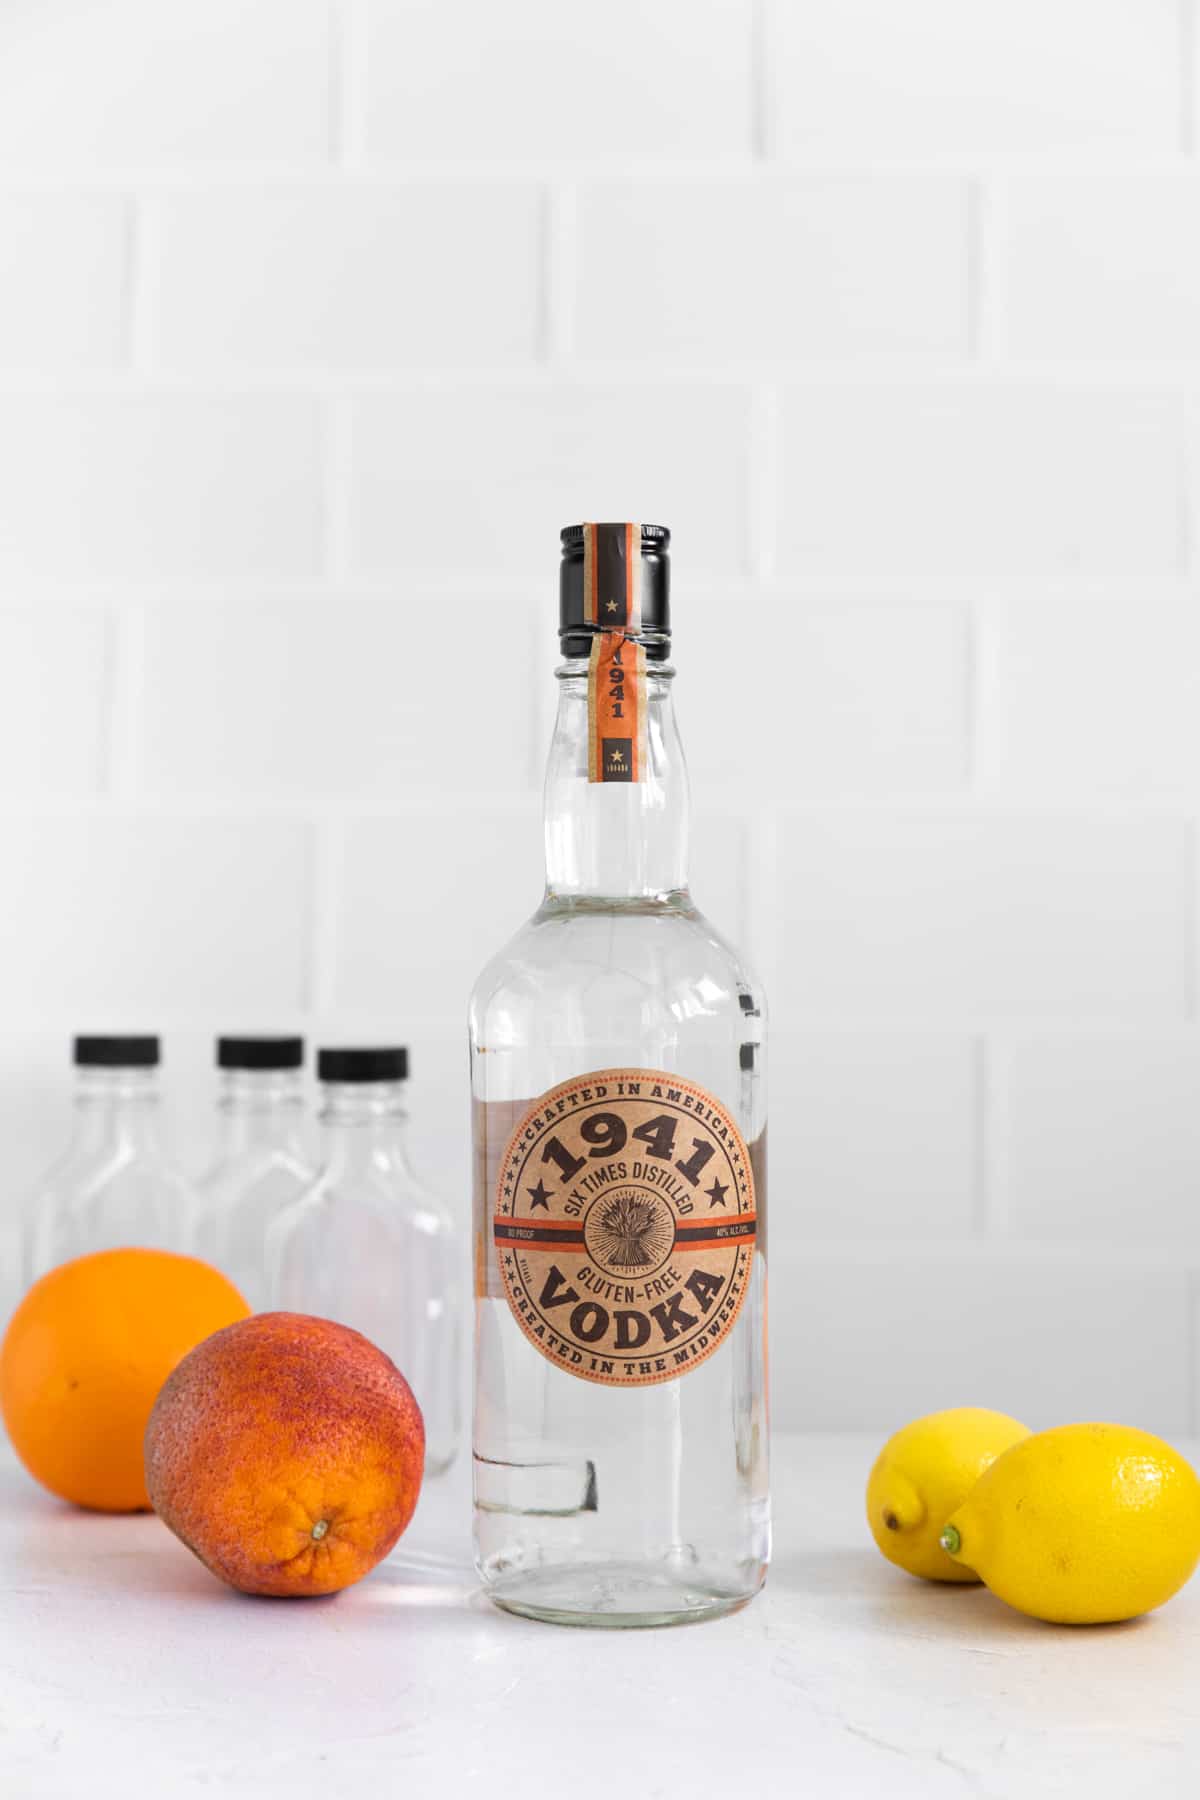 a bottle of vodka at the center, surrounded by various citrus fruits, against a white tiled background